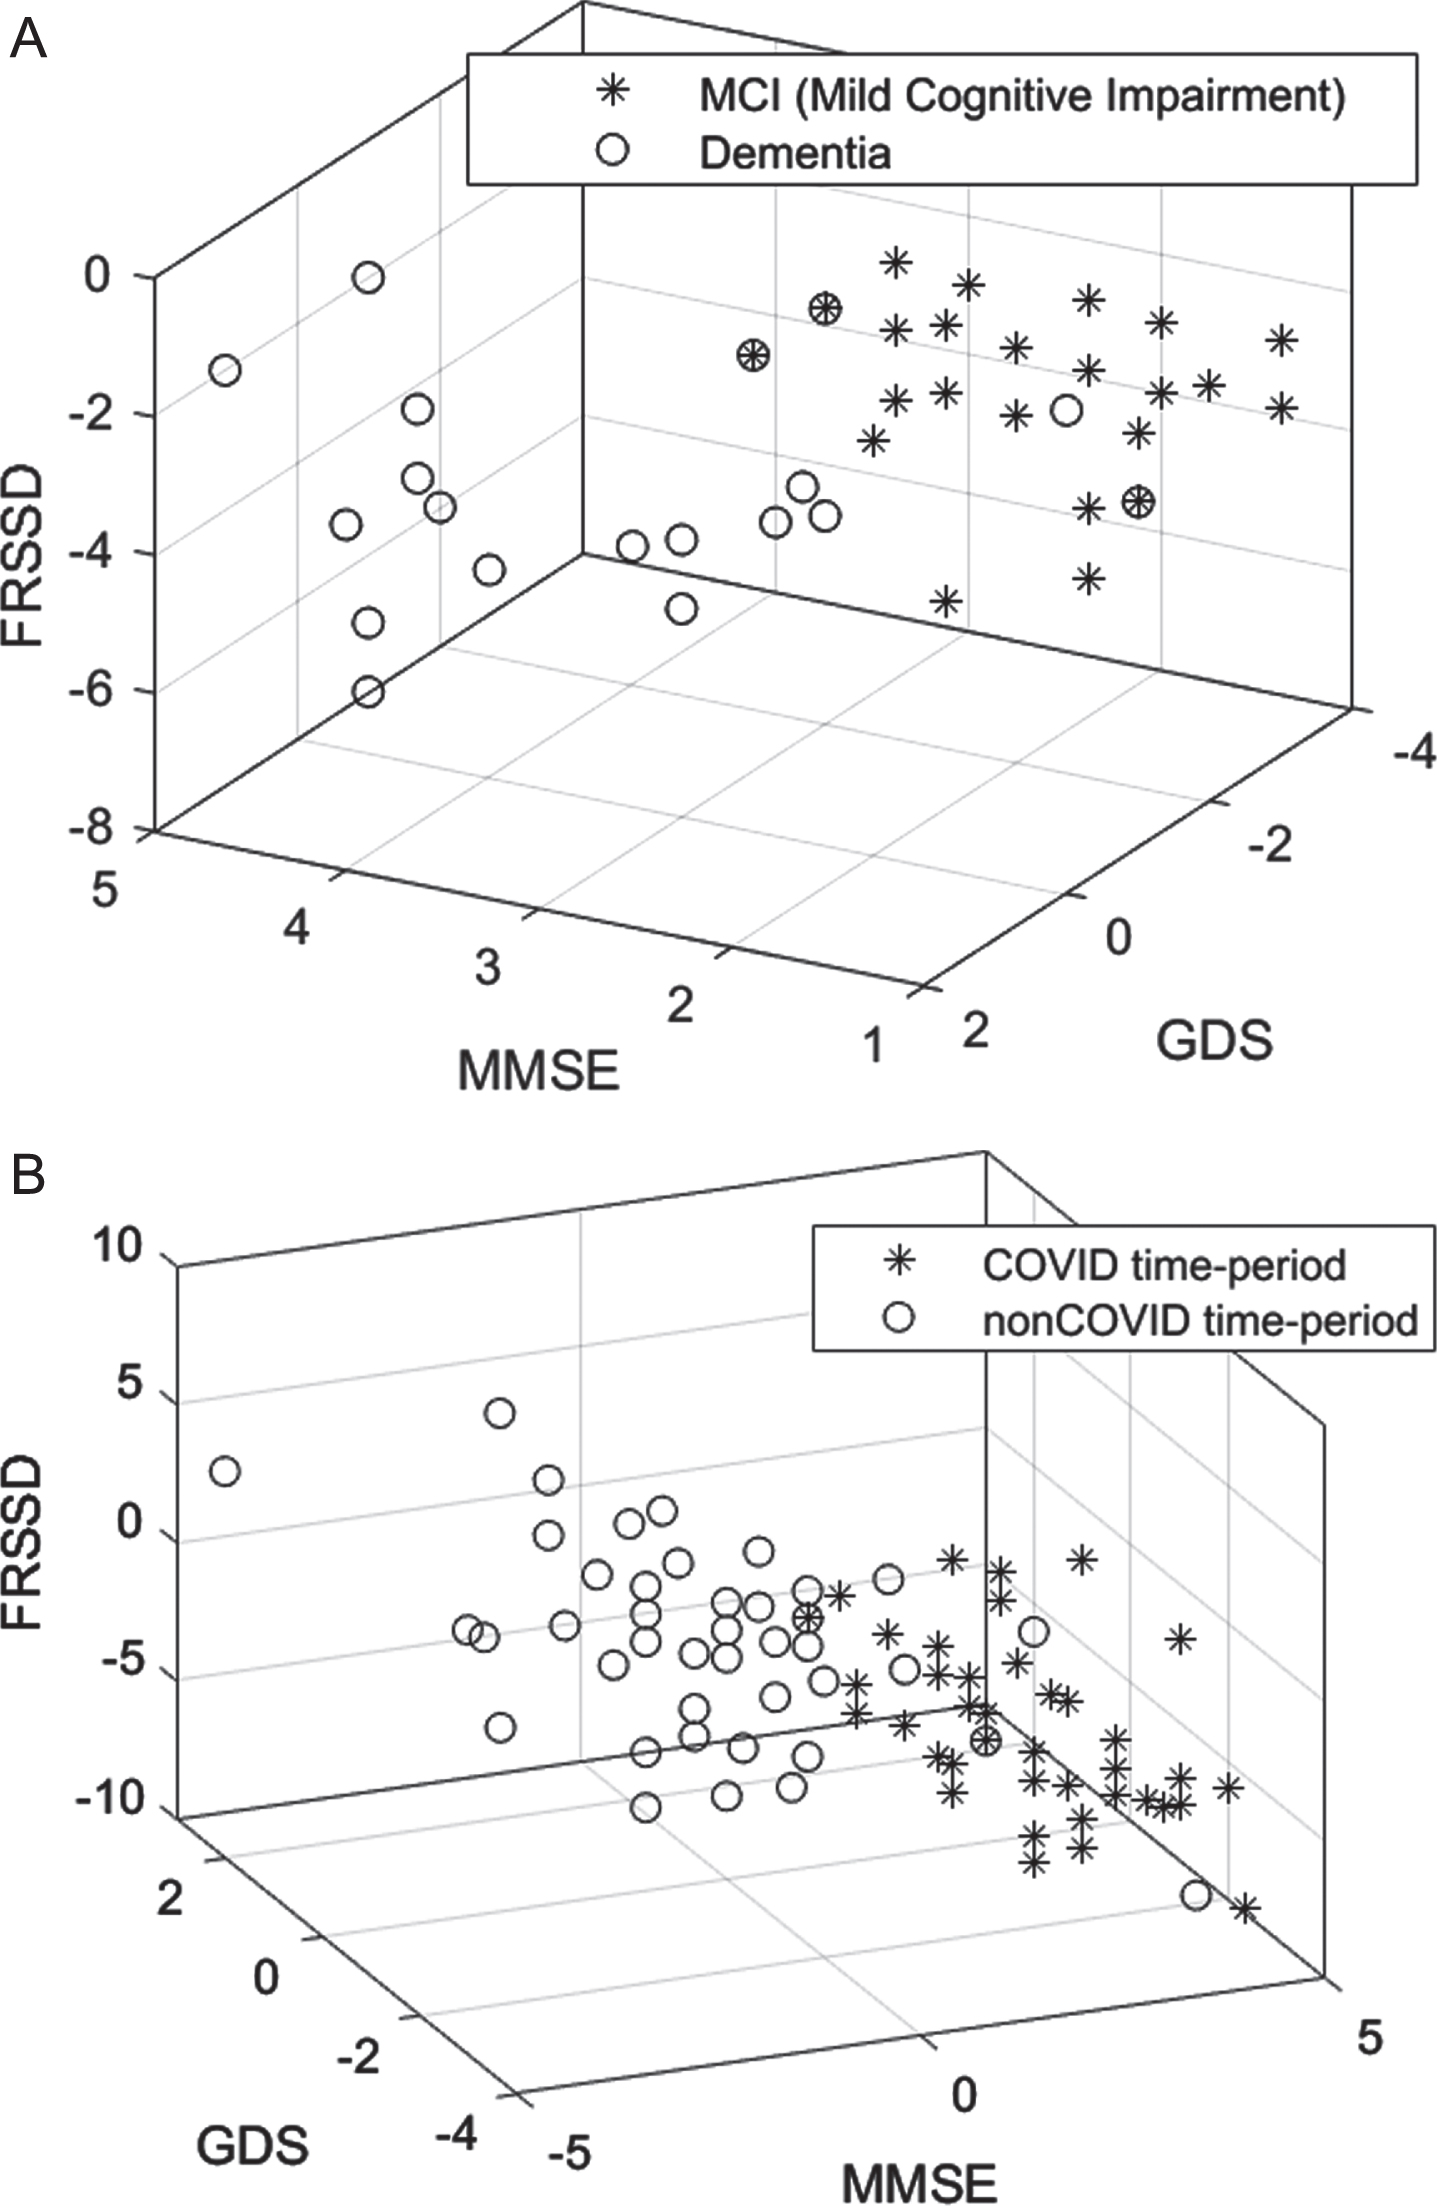 Scatter diagram showing the distributions of cognitive (MMSE), functional (FRSSD) and emotional (GDS) neurophysiological assessments (A) for the COVID and non-COVID time-period and (B) for the MCI and dementia diagnosed participants within the COVID time-period.